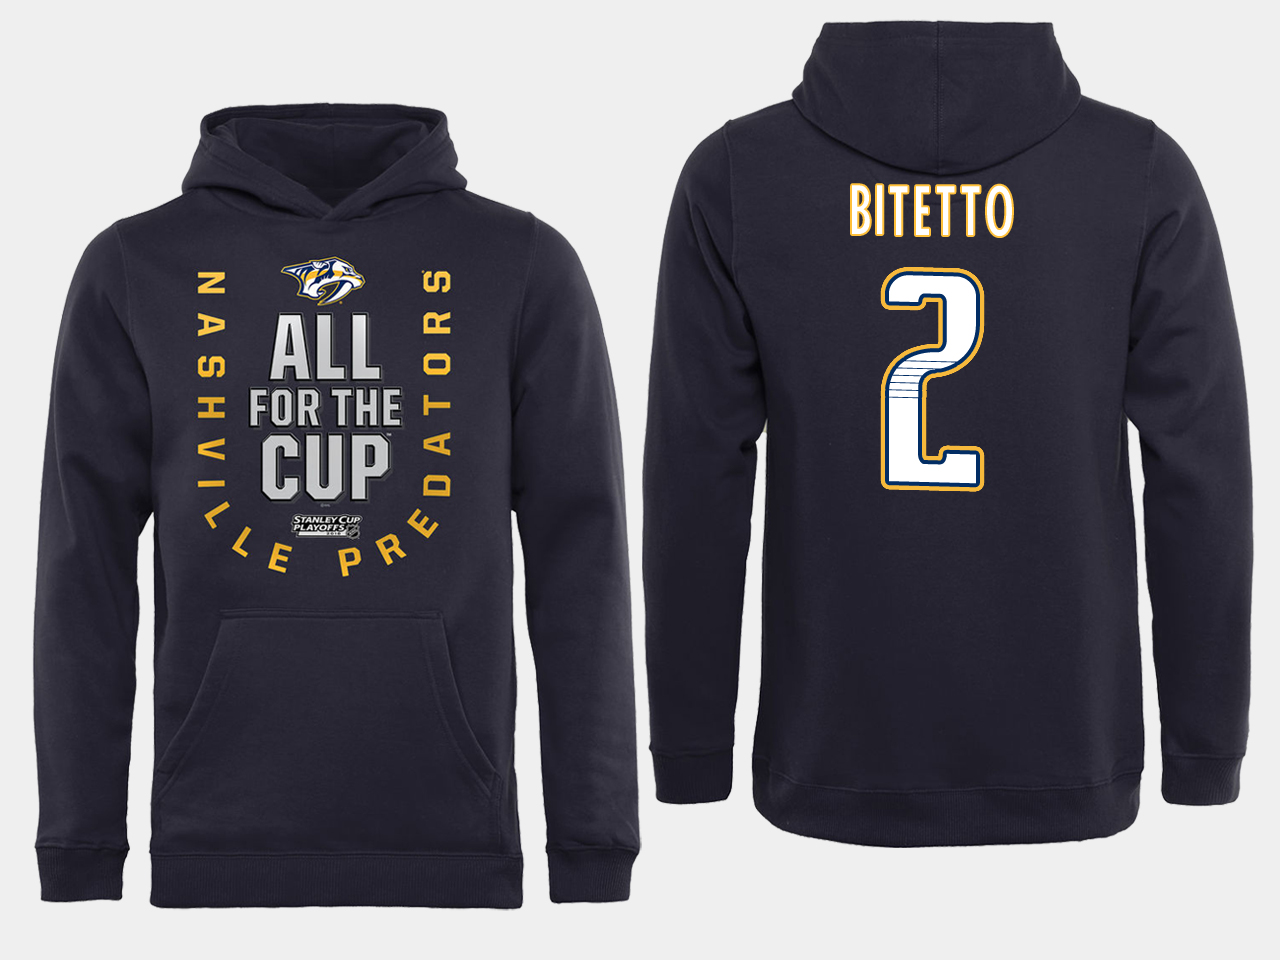 Men NHL Adidas Nashville Predators #2 Bitetto black ALL for the Cup hoodie